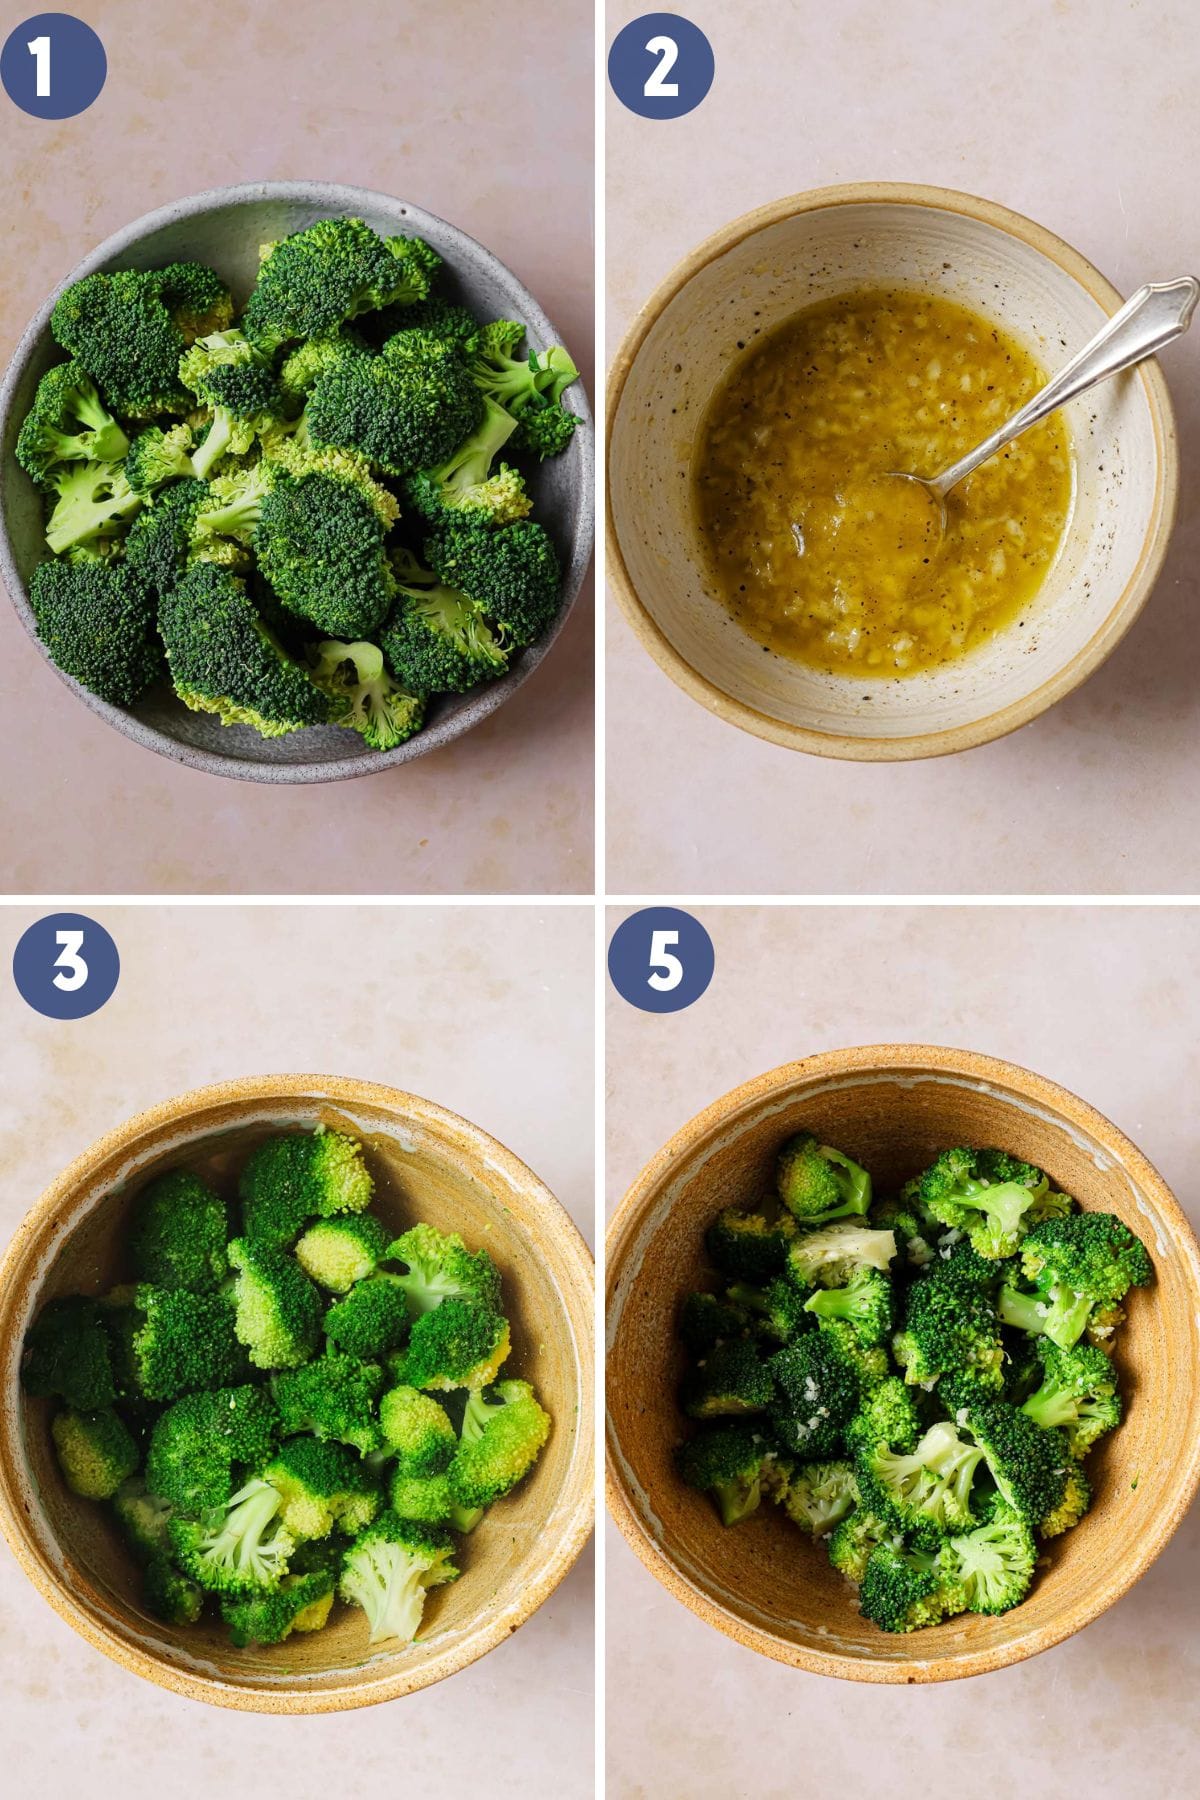 Person demos how to trim, blanch broccoli and make garlic butter sauce.